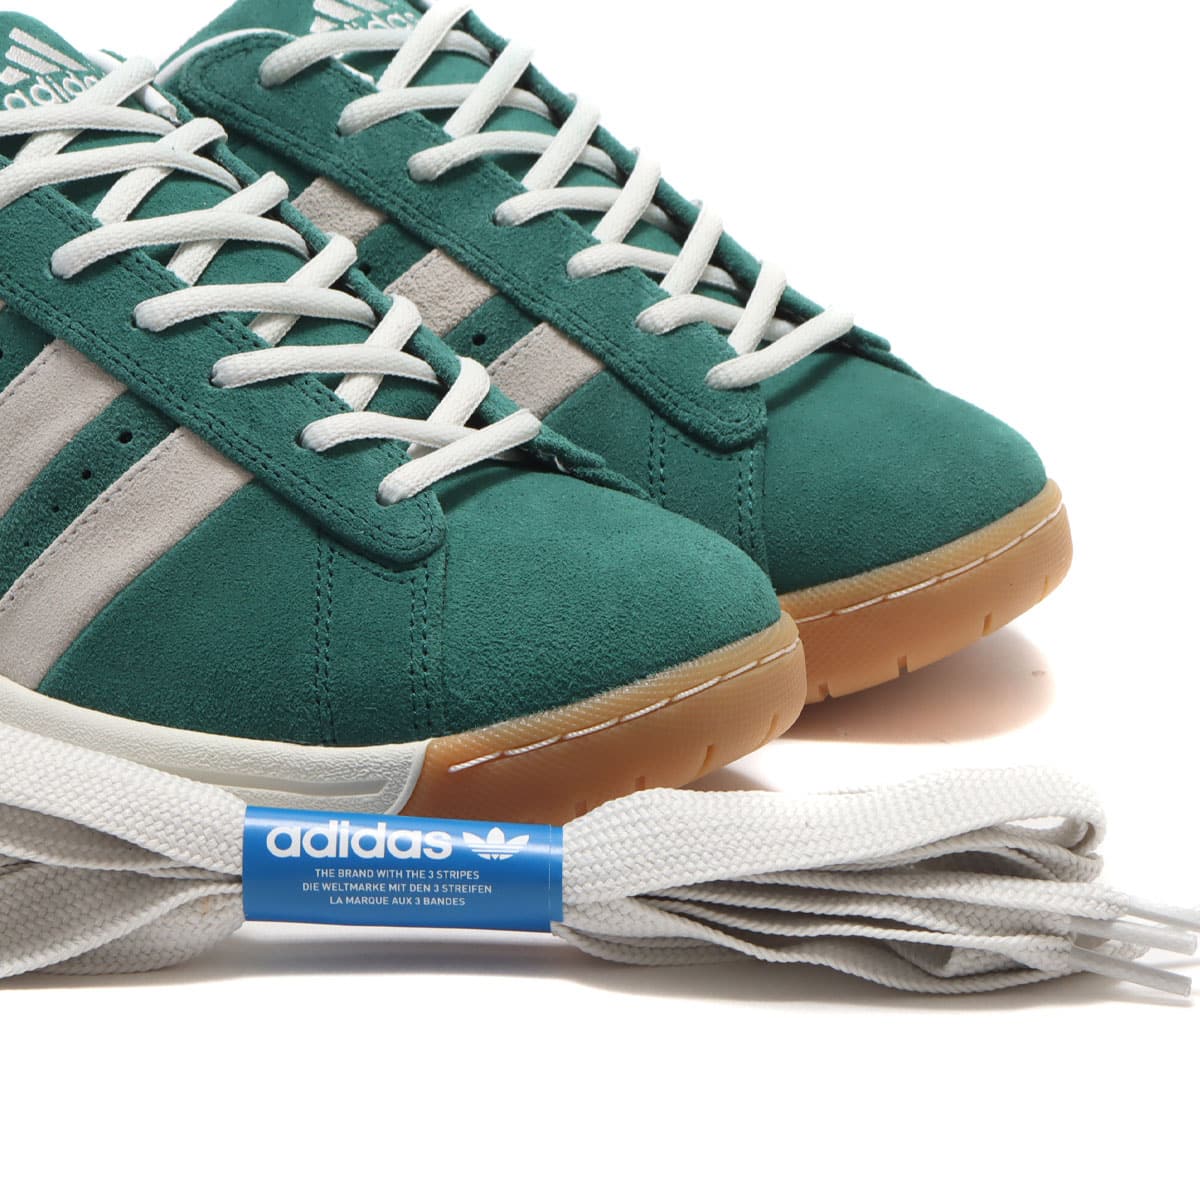 atmos adidas Campus Supreme Sole Green IF9989 4